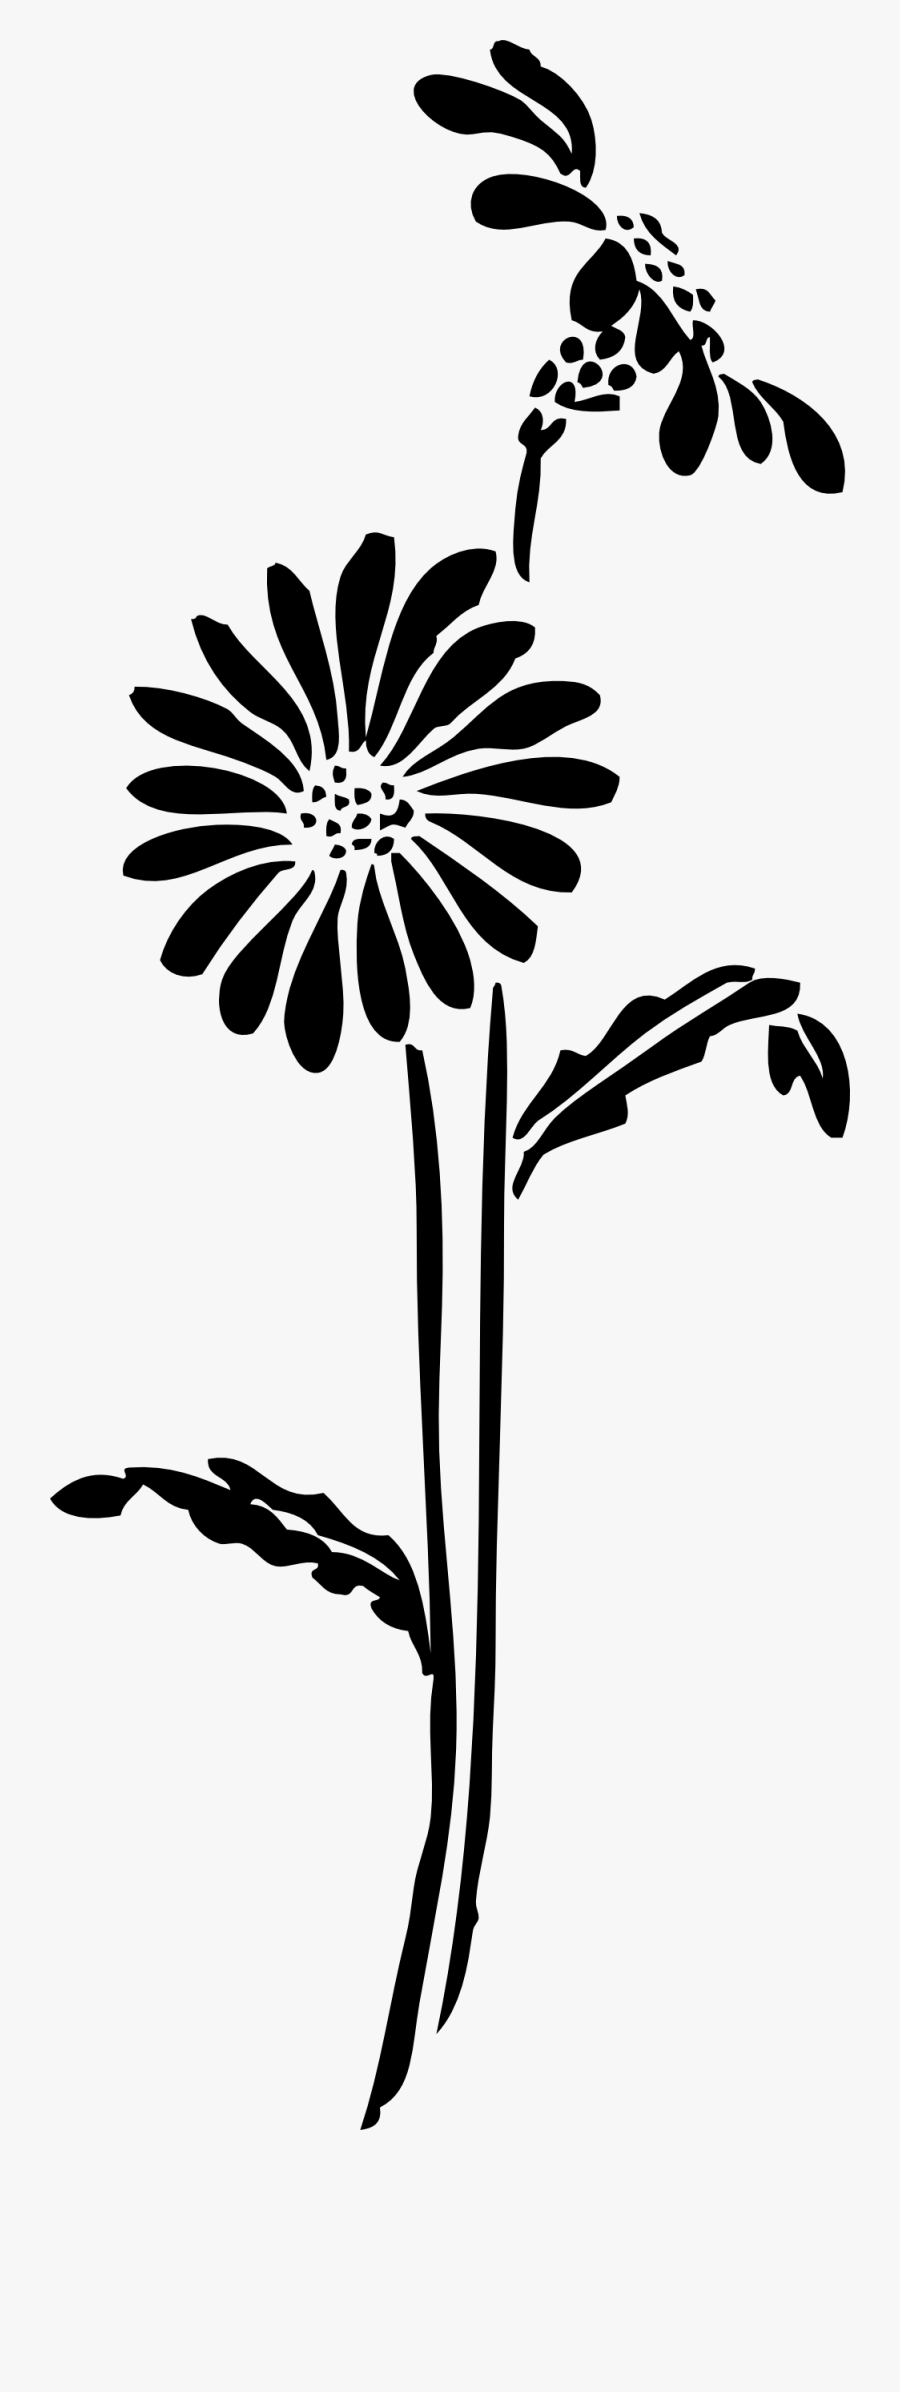 Flowers Big Image Png - Flower Silhouette No Background, Transparent Clipart